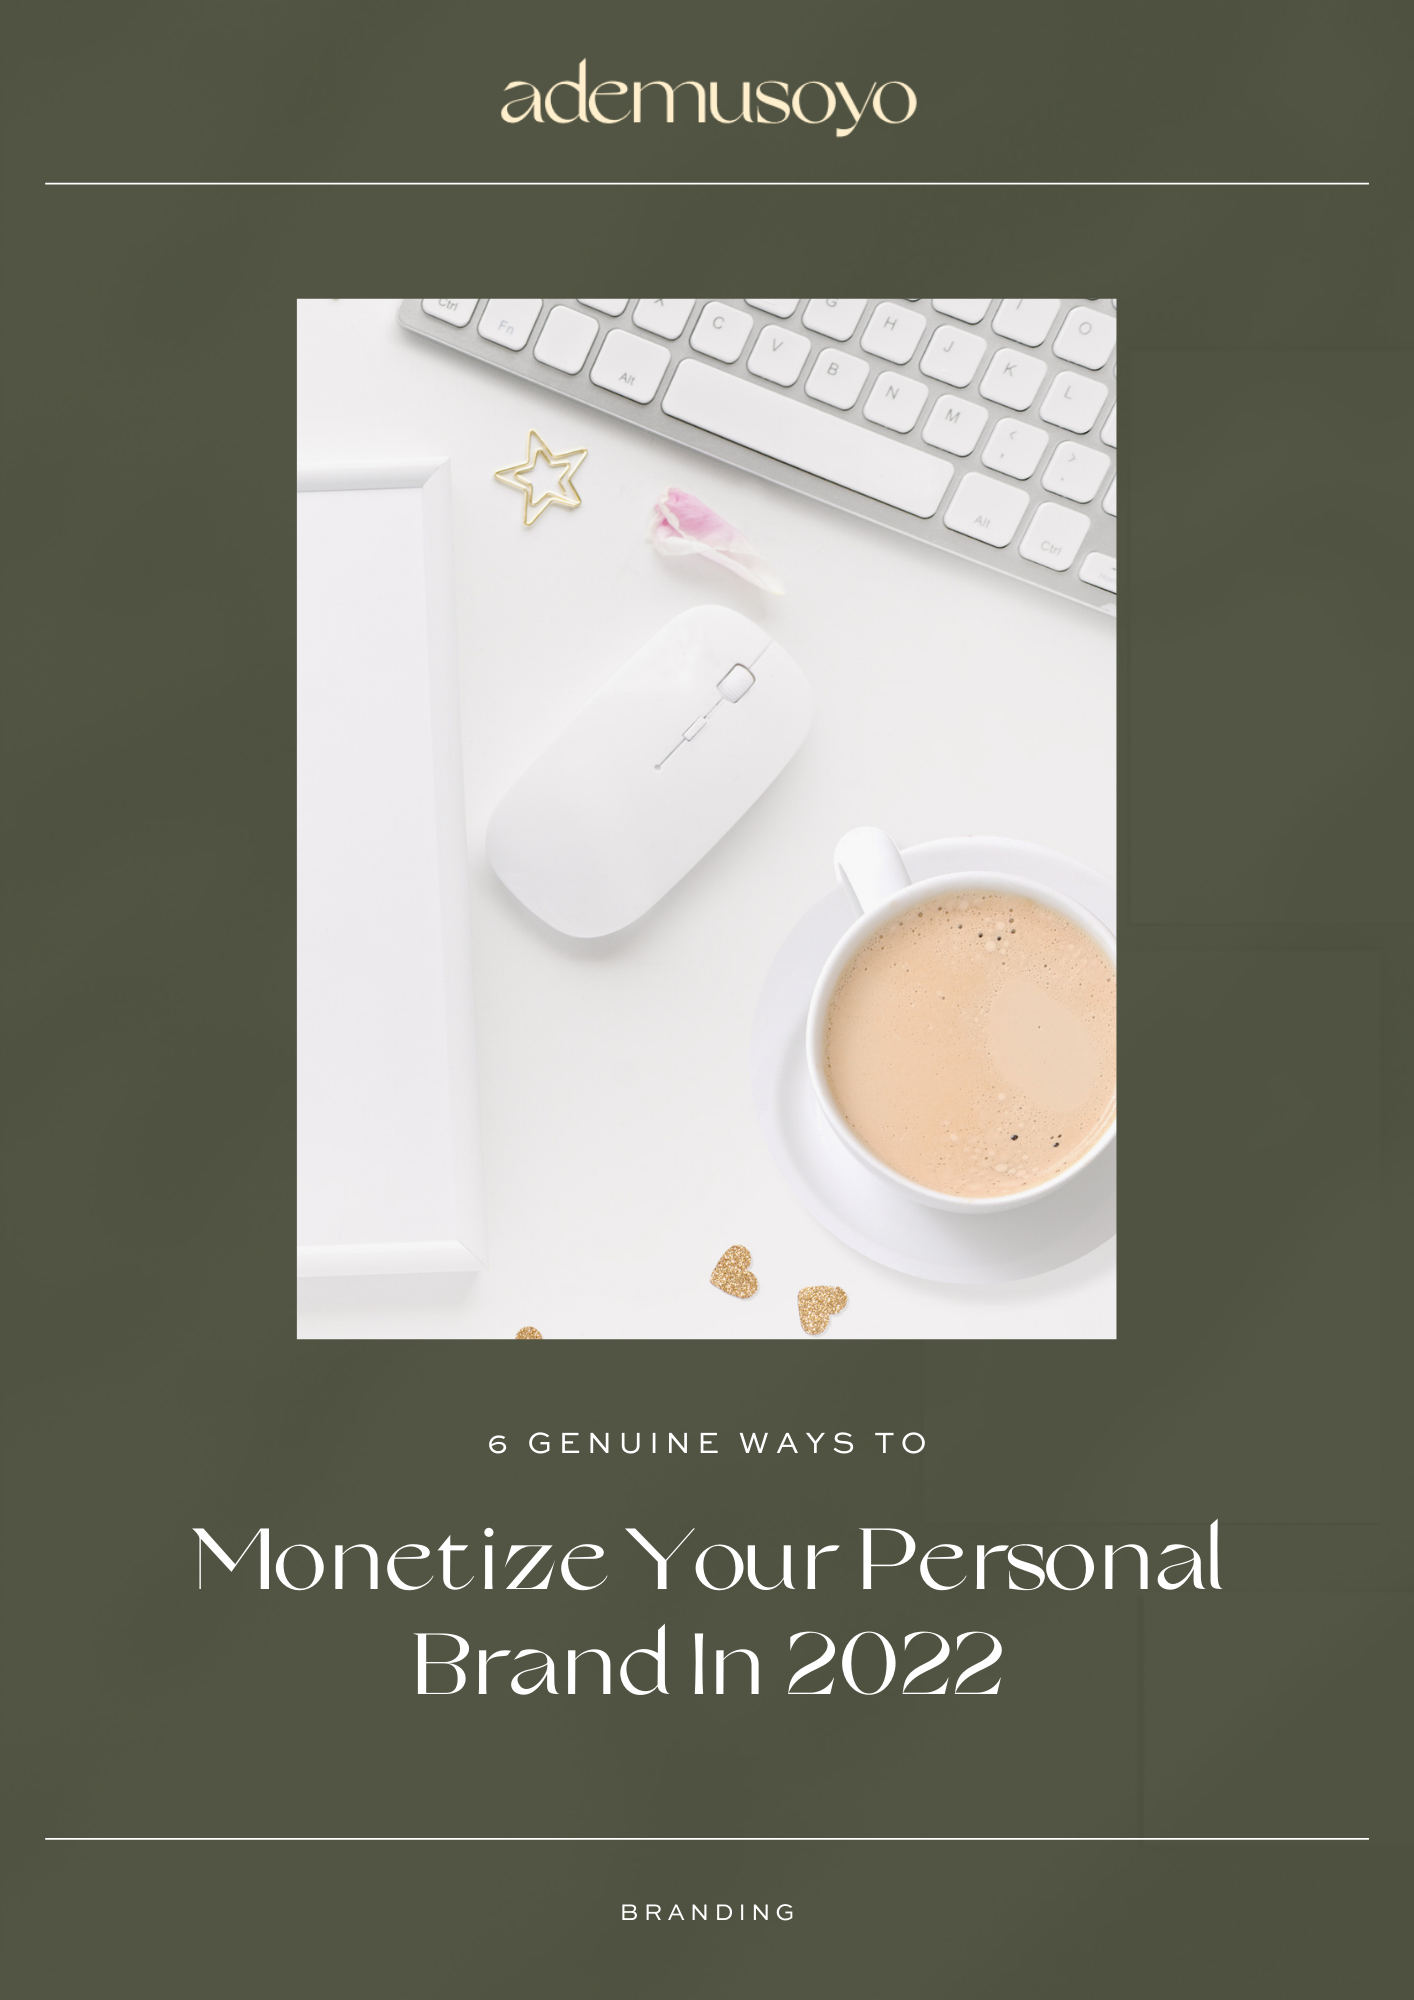 6 Genuine Ways To Monetize Your Personal Brand In 2022